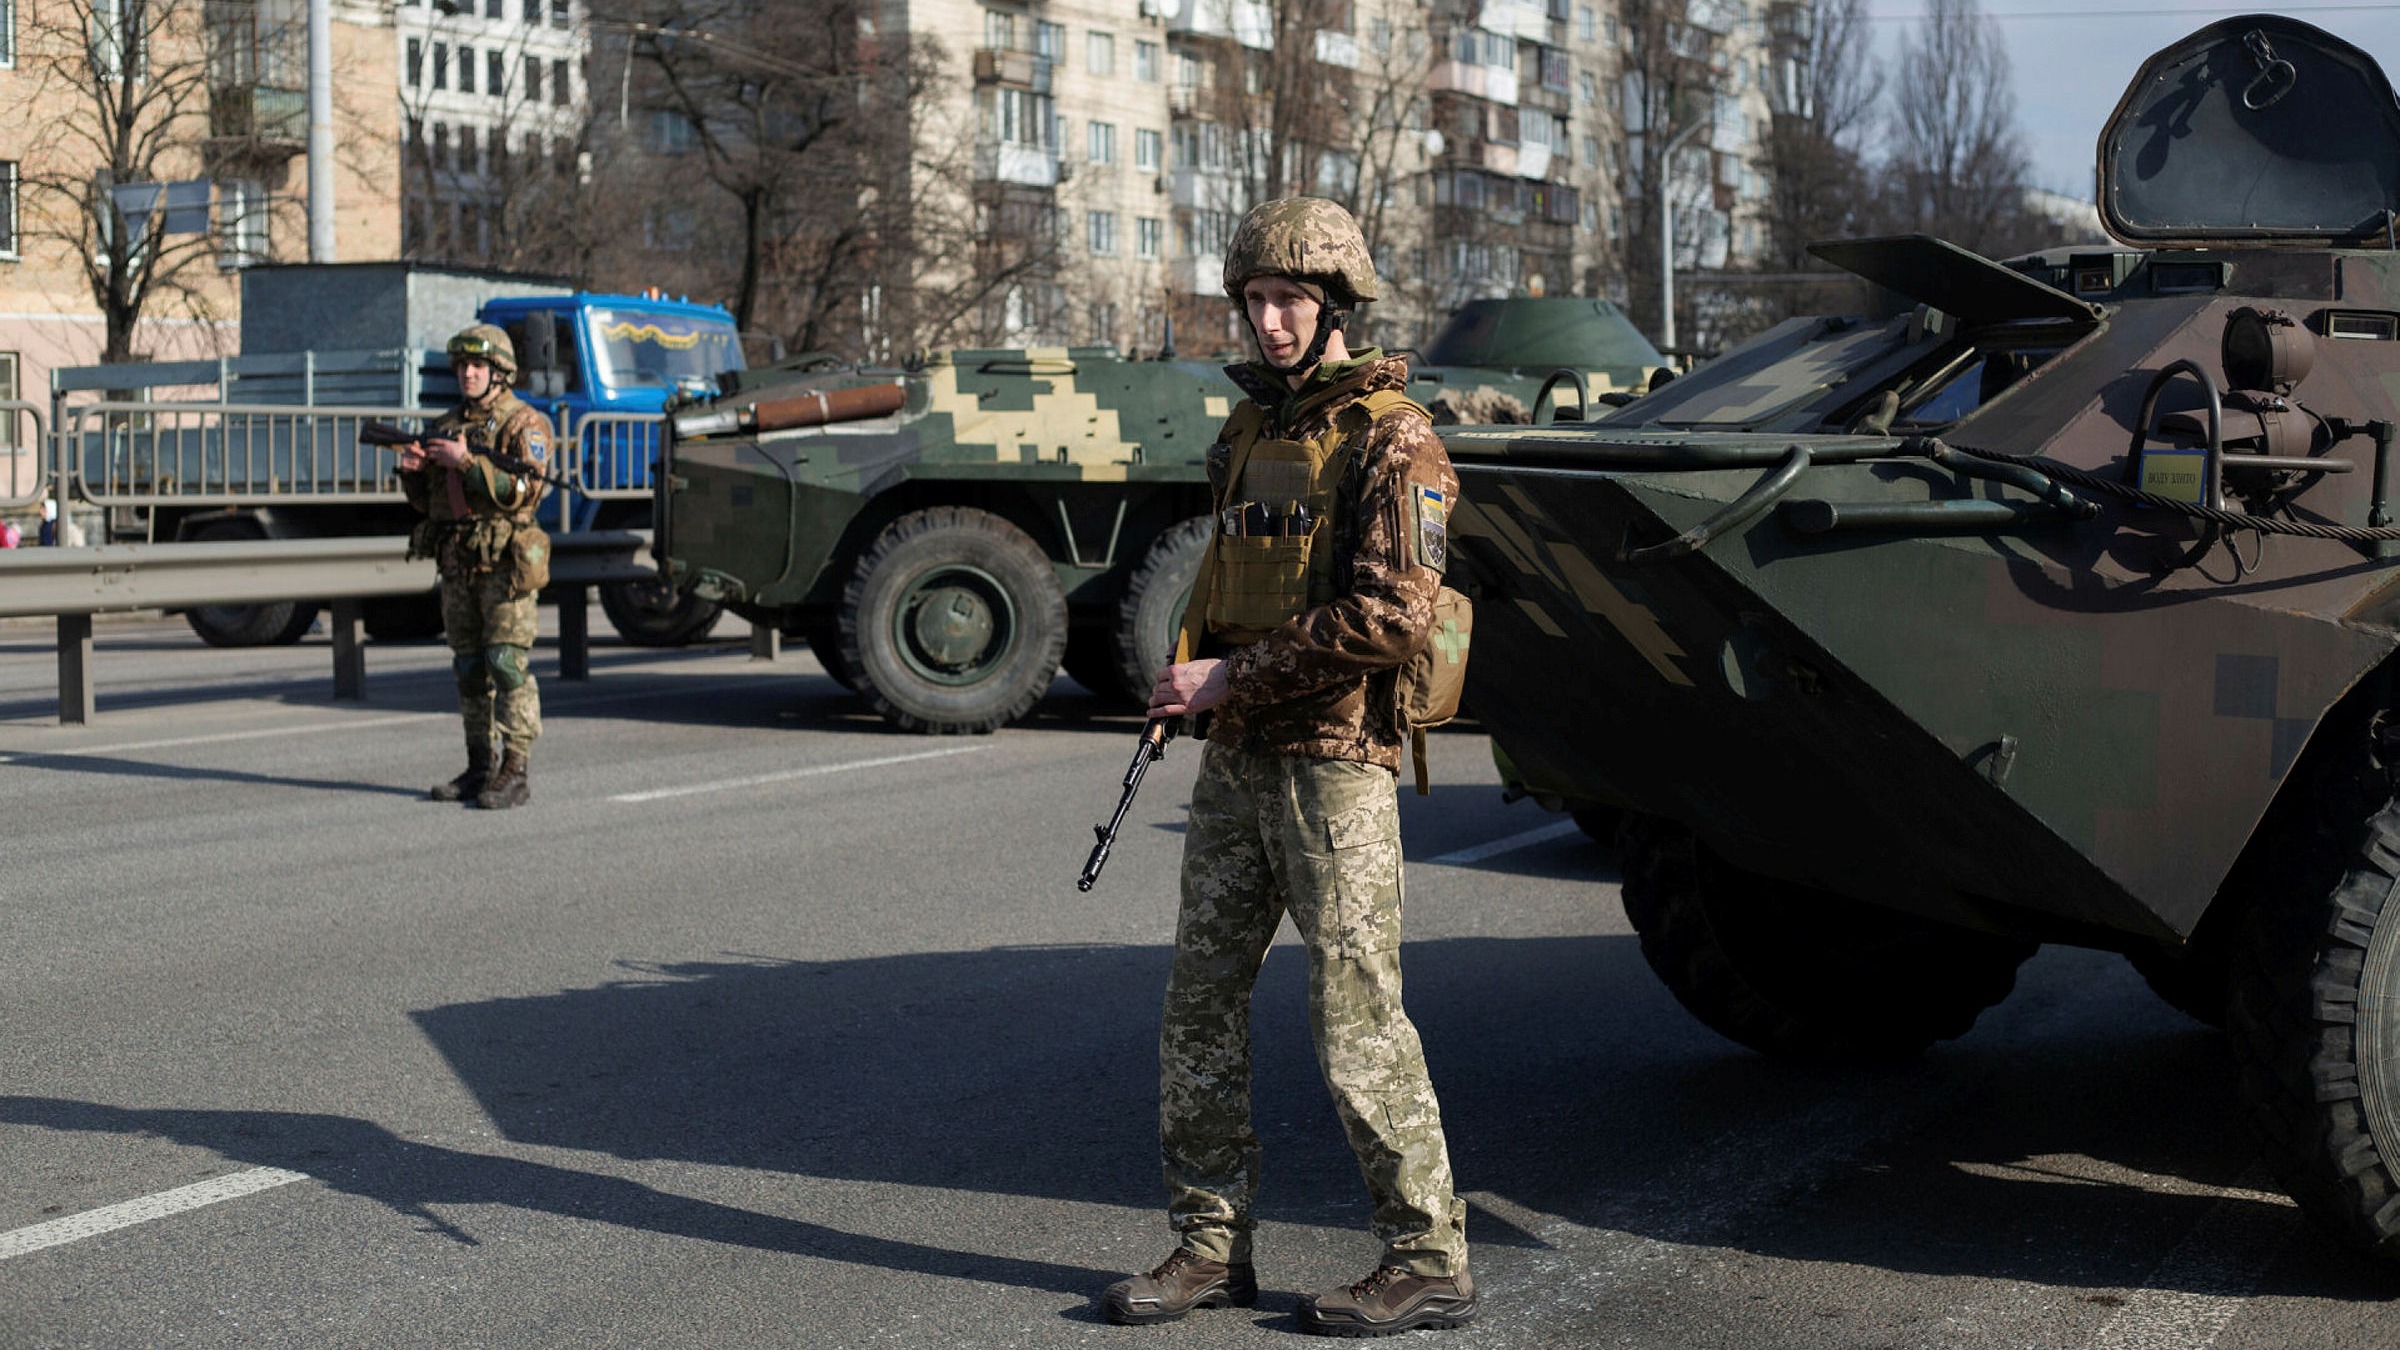 Brutal' battle for Kyiv looms as Russian troops enter Ukraine's capital |  Financial Times